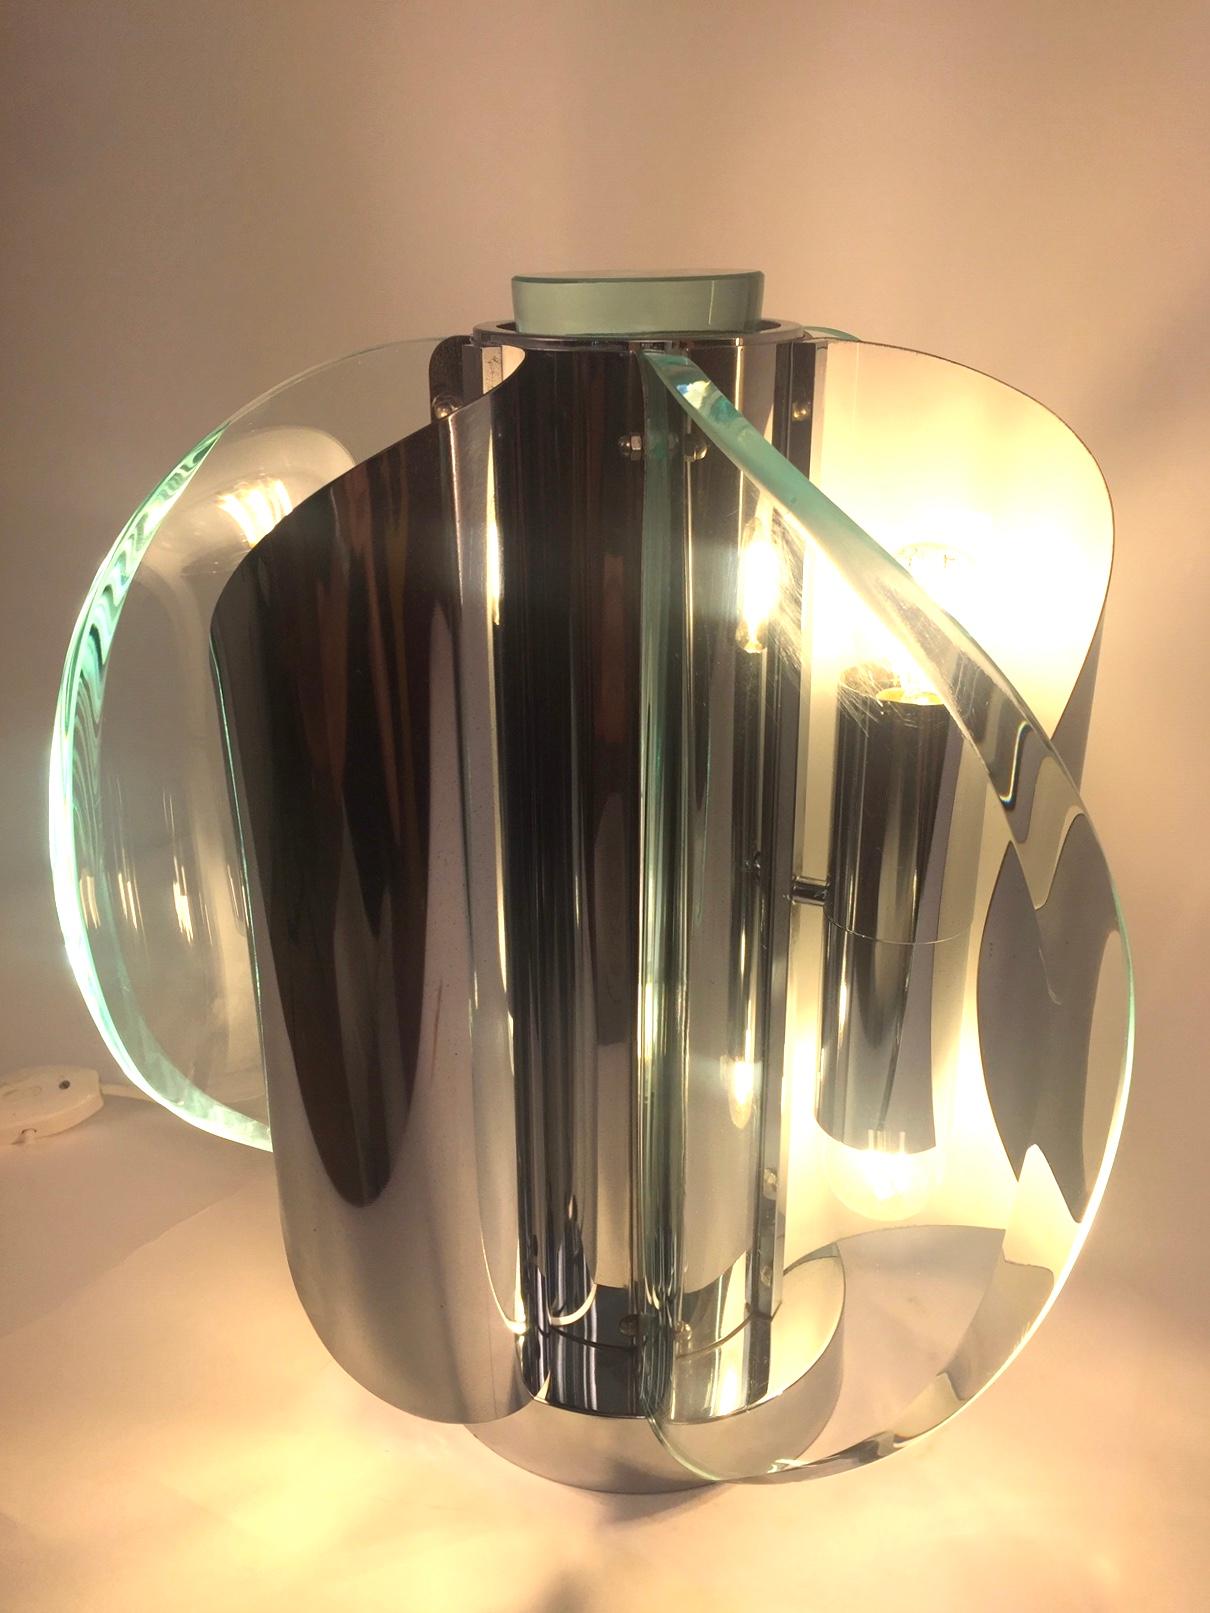 A extremely rare lamp designed by Gaetano Sciolari. Chromed steel and thick molded glass. Excellent vintage condition.Professional packing and shipping provided.